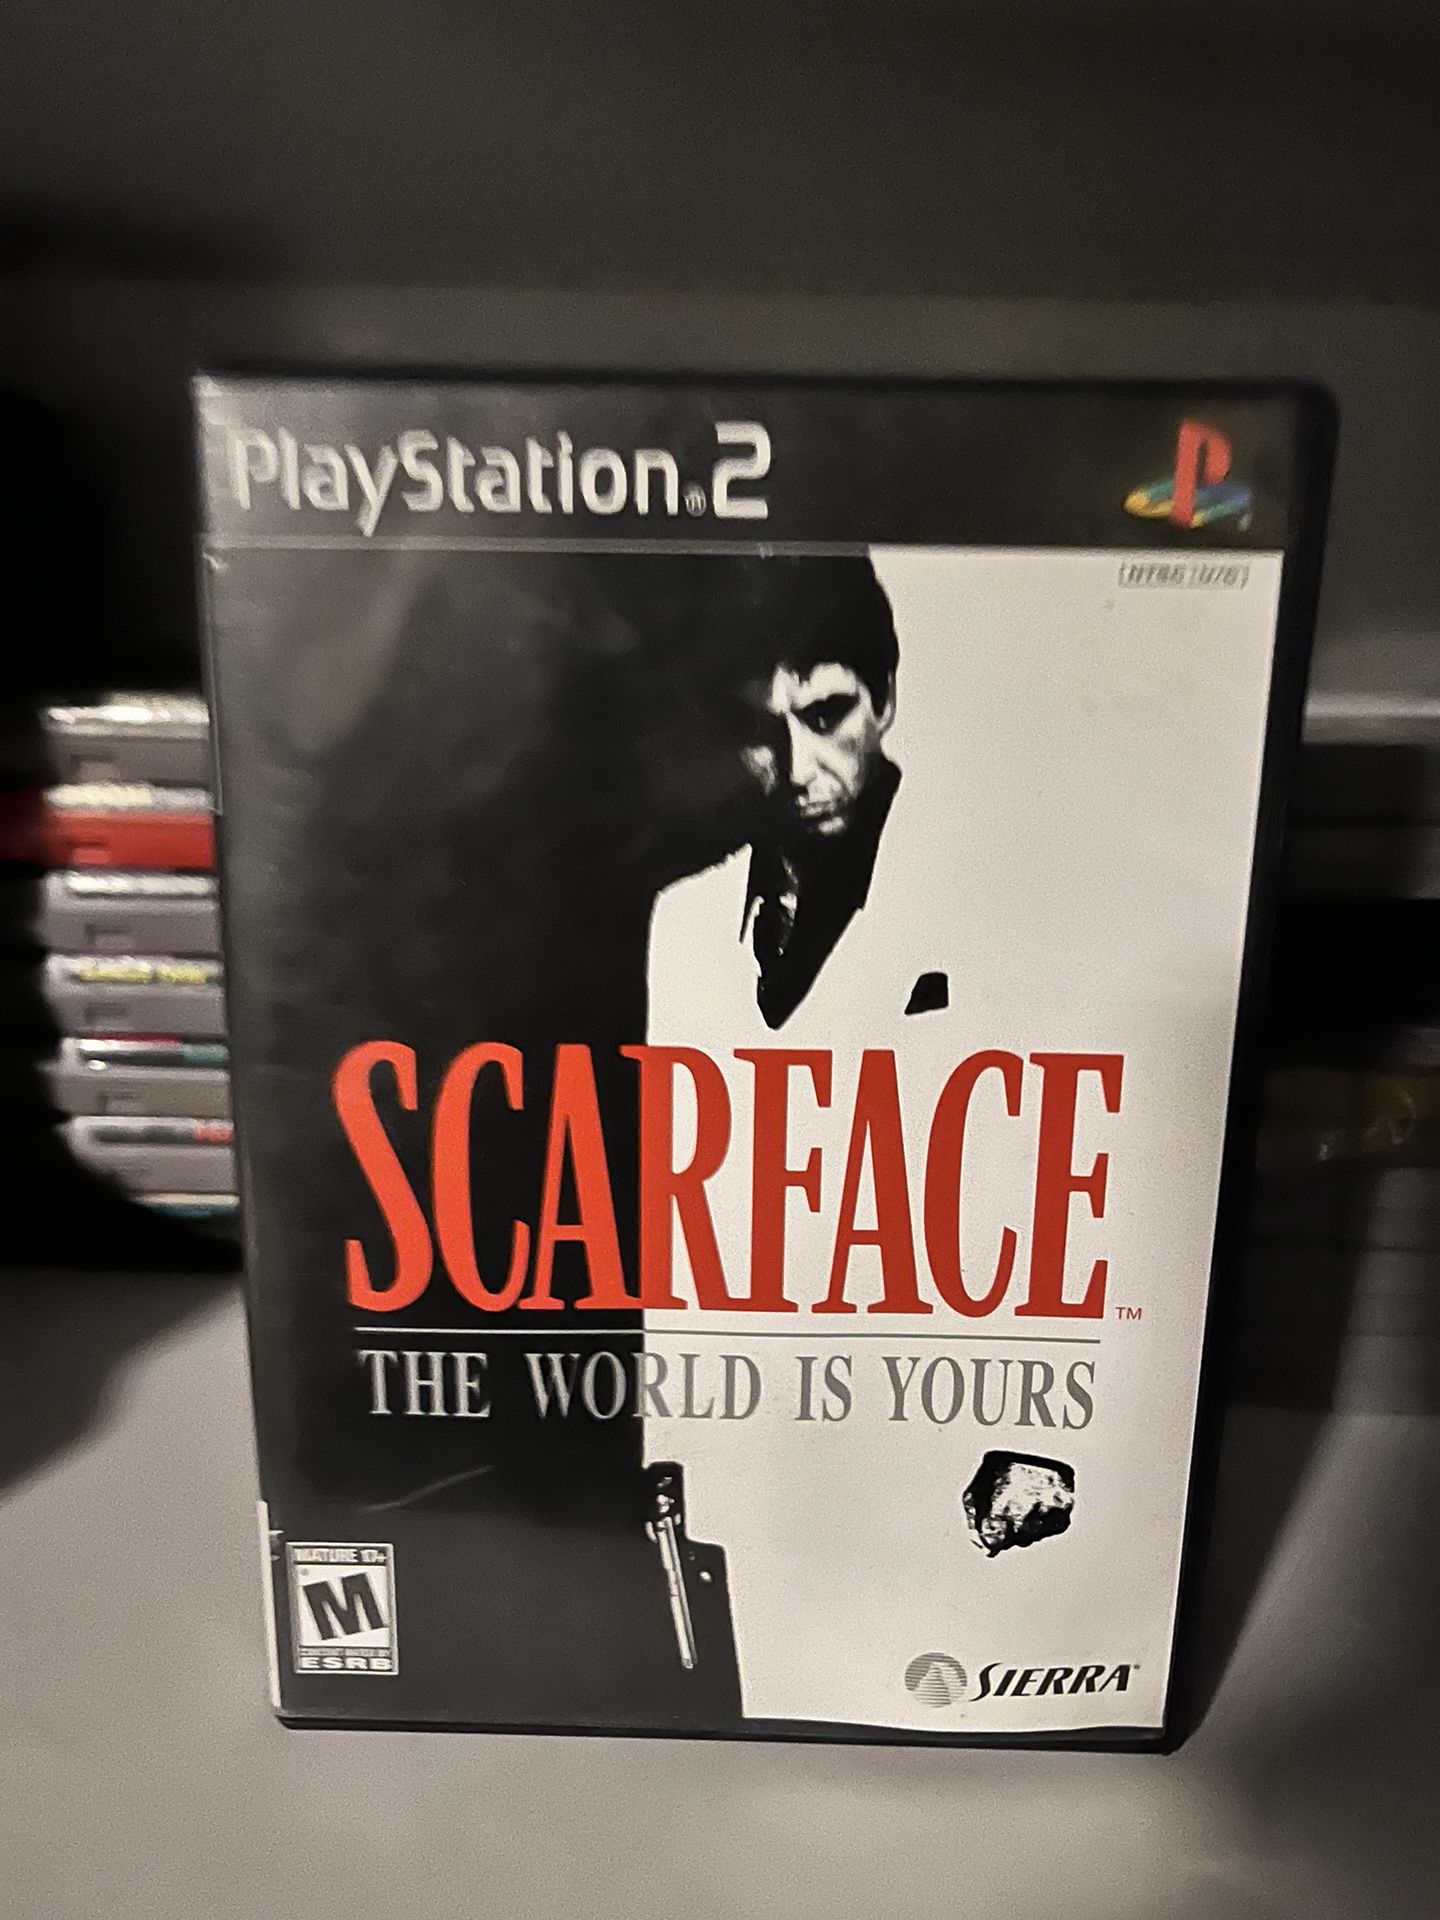 Scarface (PS2)